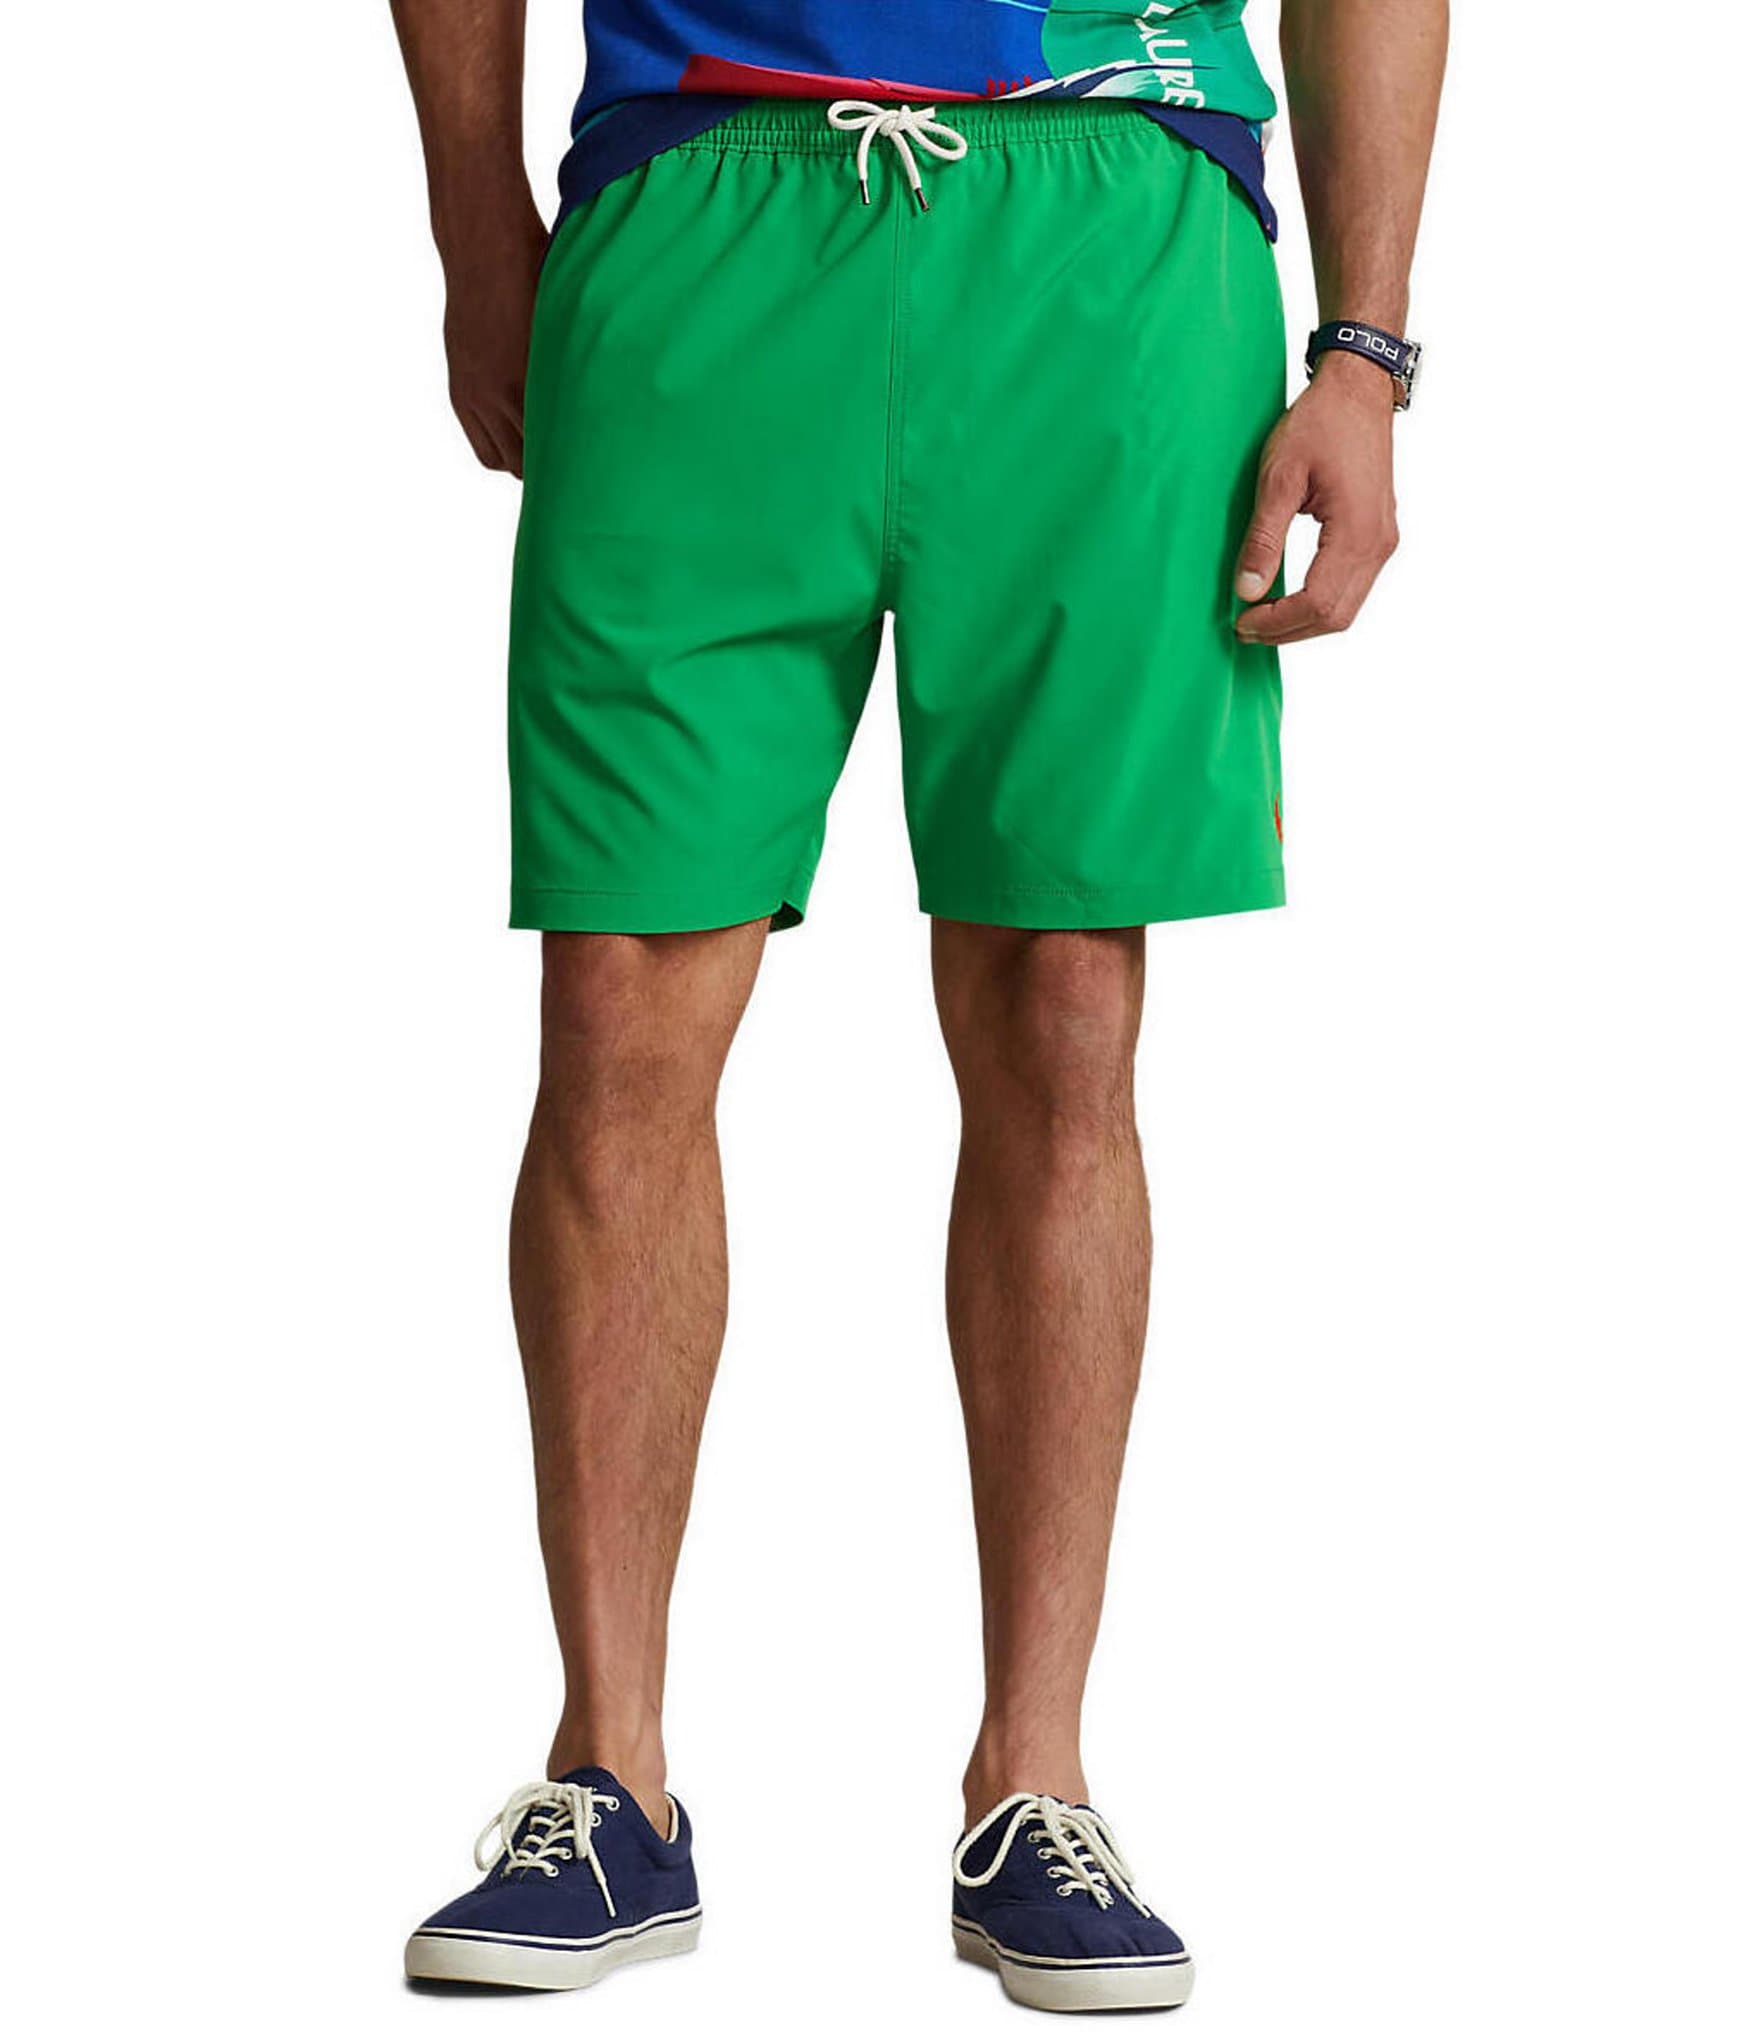 Polo Ralph Lauren Big & Tall 9.5 and 10.5 Inseam Stretch Twill Shorts